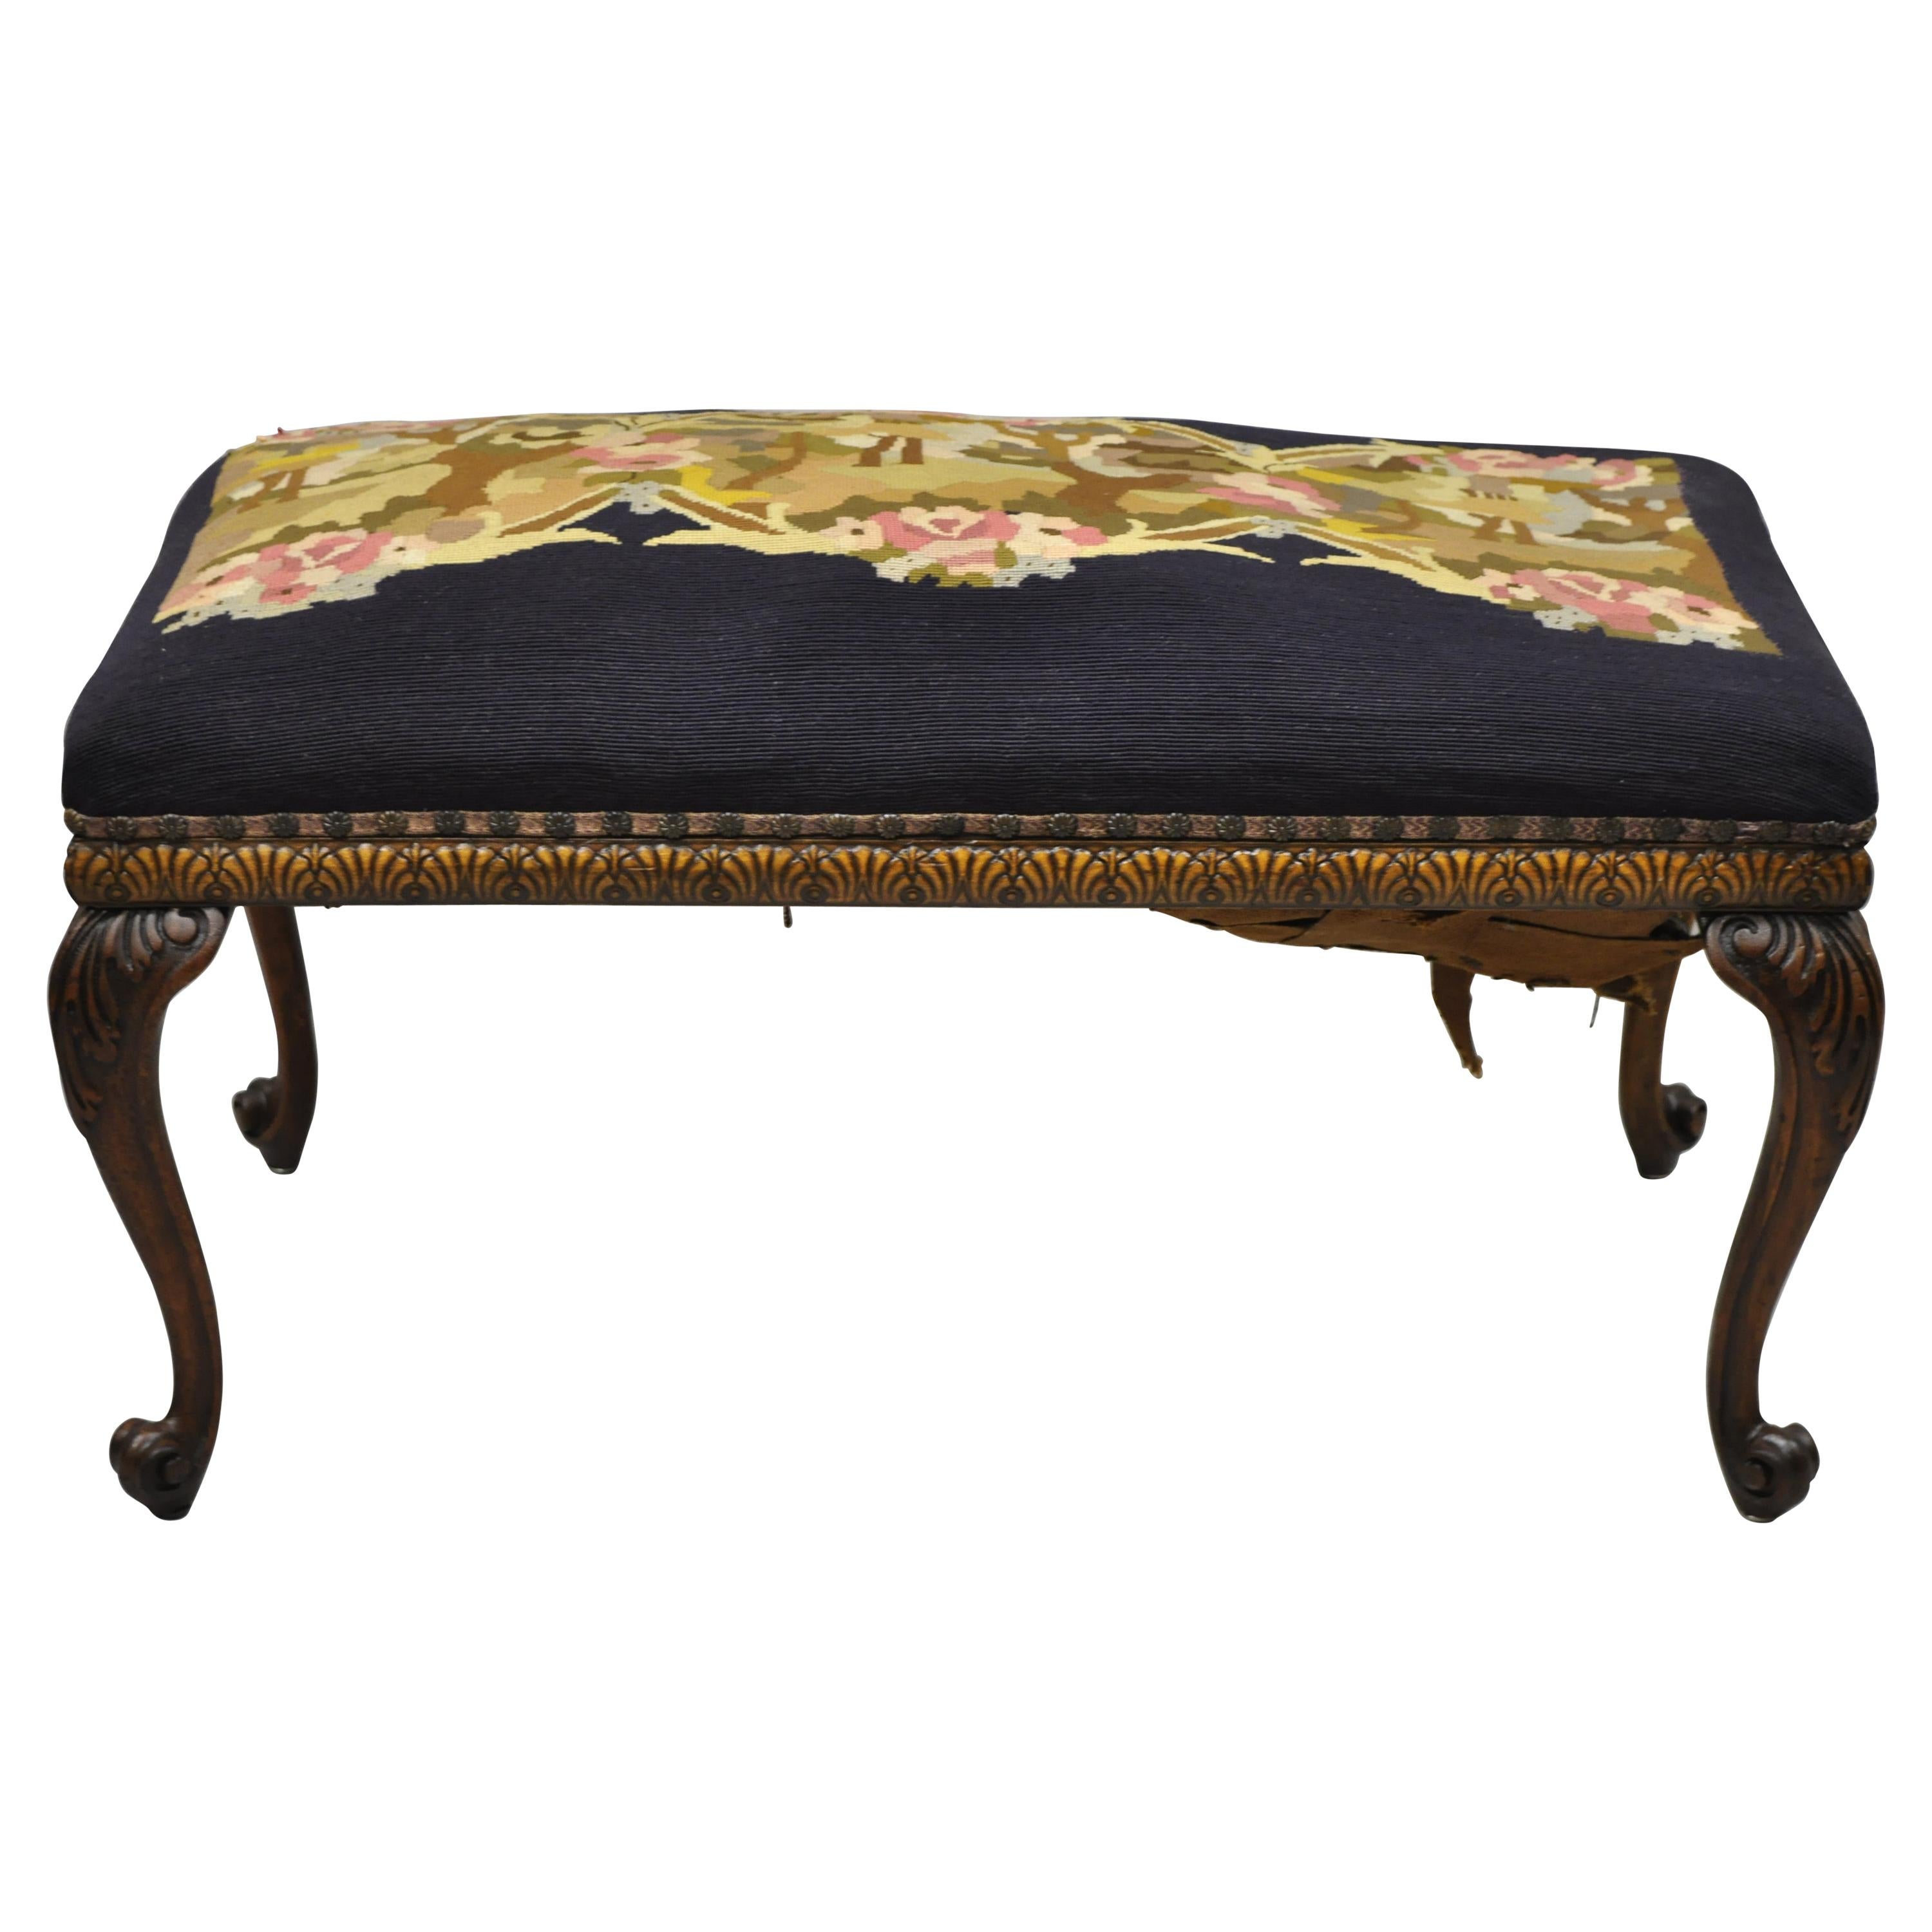 Antique French Victorian Needlepoint Carved Cabriole Leg Mahogany Bench For Sale